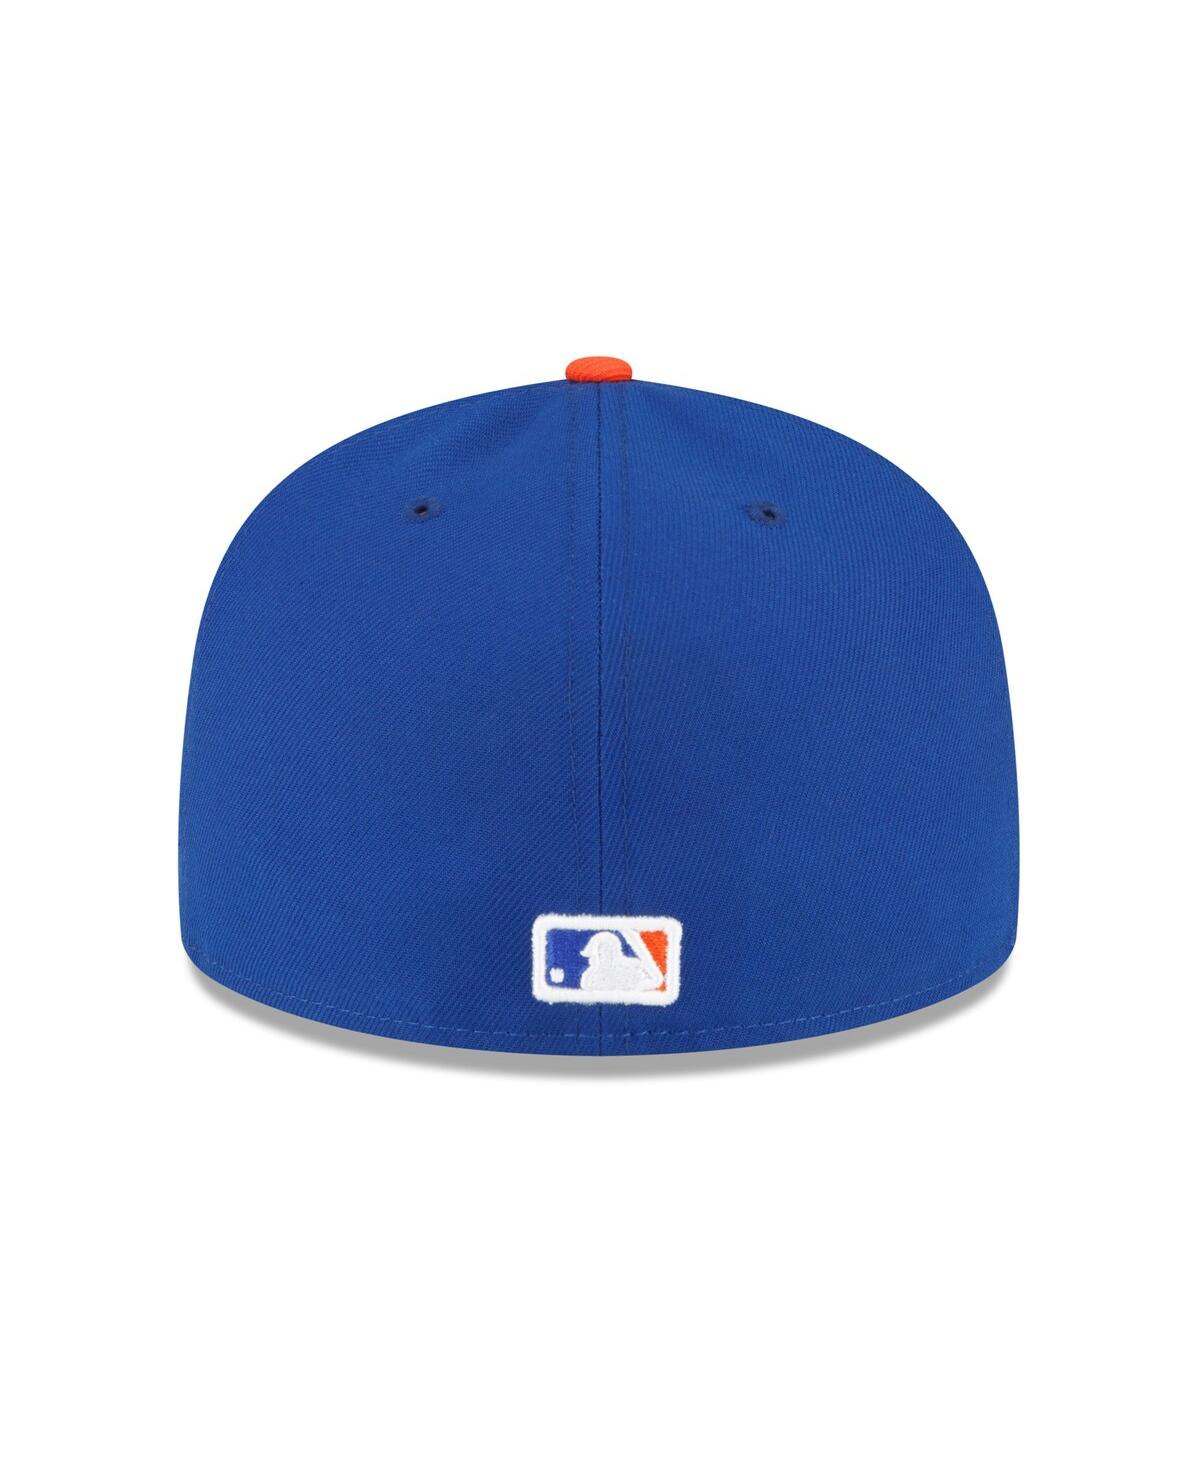 Shop New Era Men's  Royal New York Mets Authentic Collection Replica 59fifty Fitted Hat